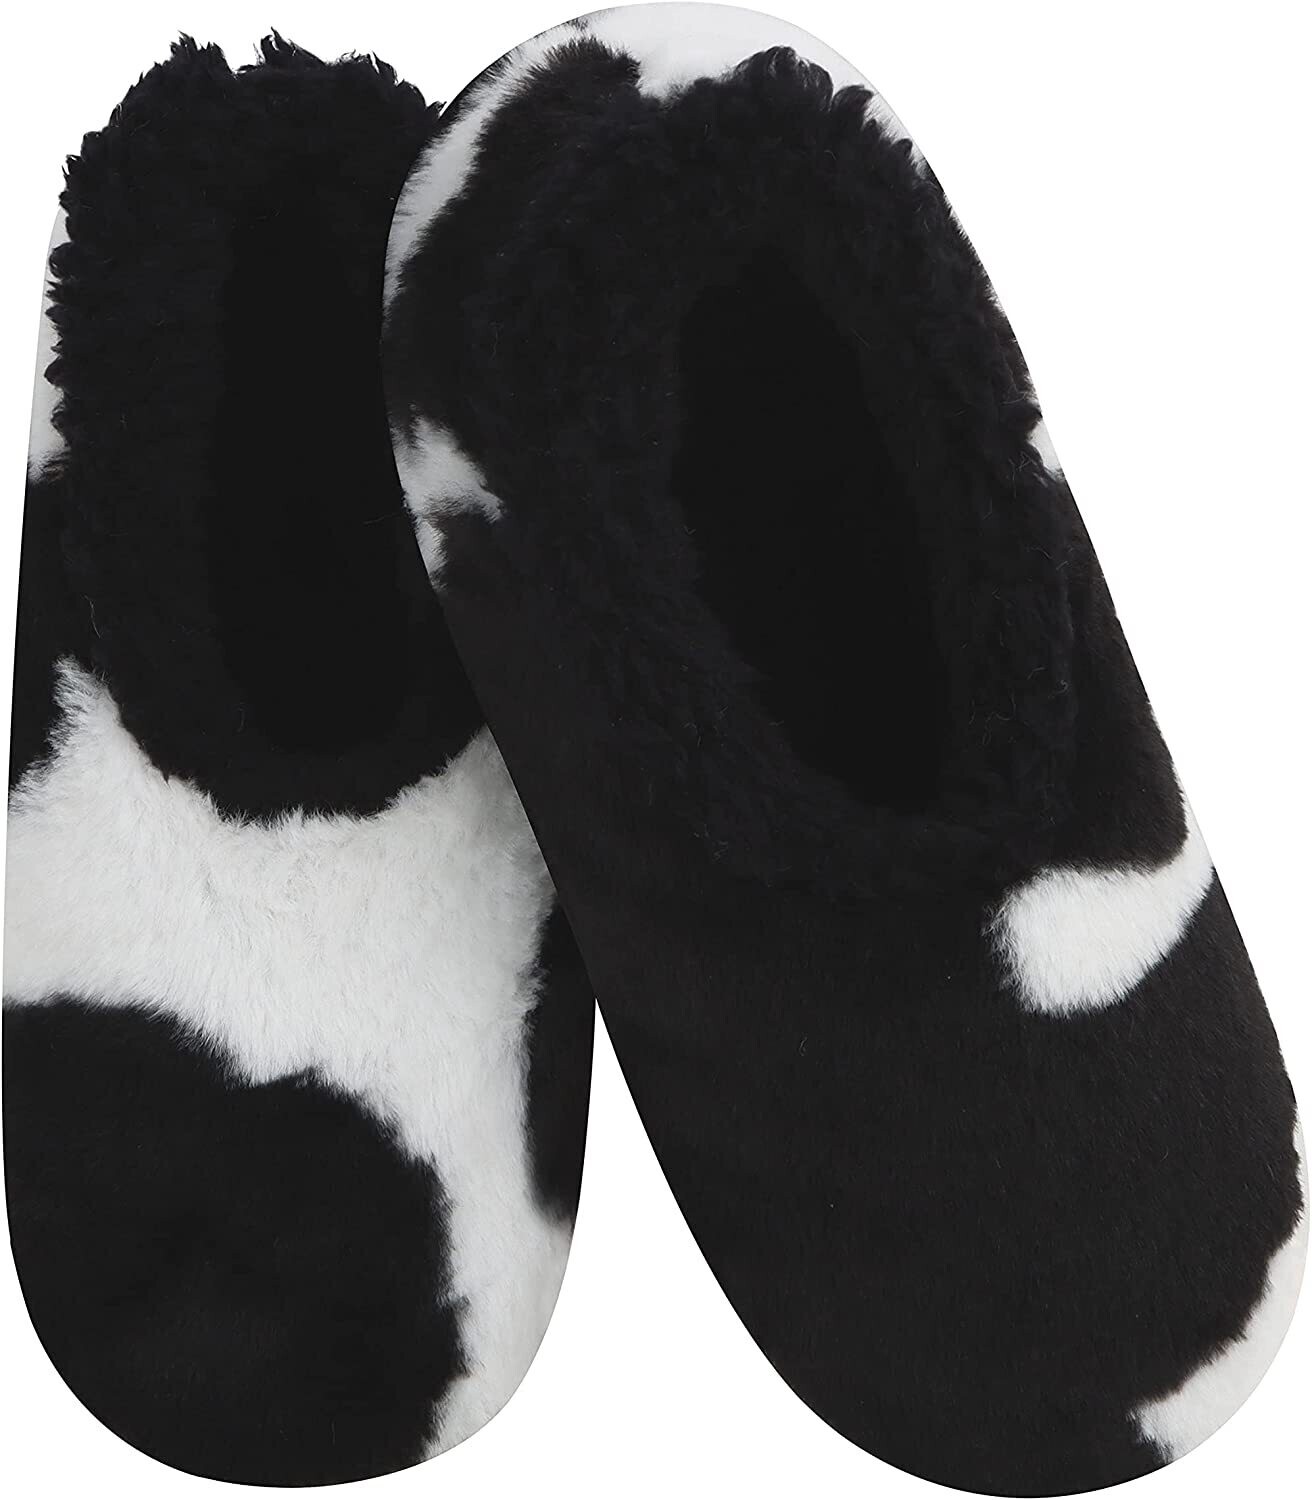 Holy Cow Slippers Black & White